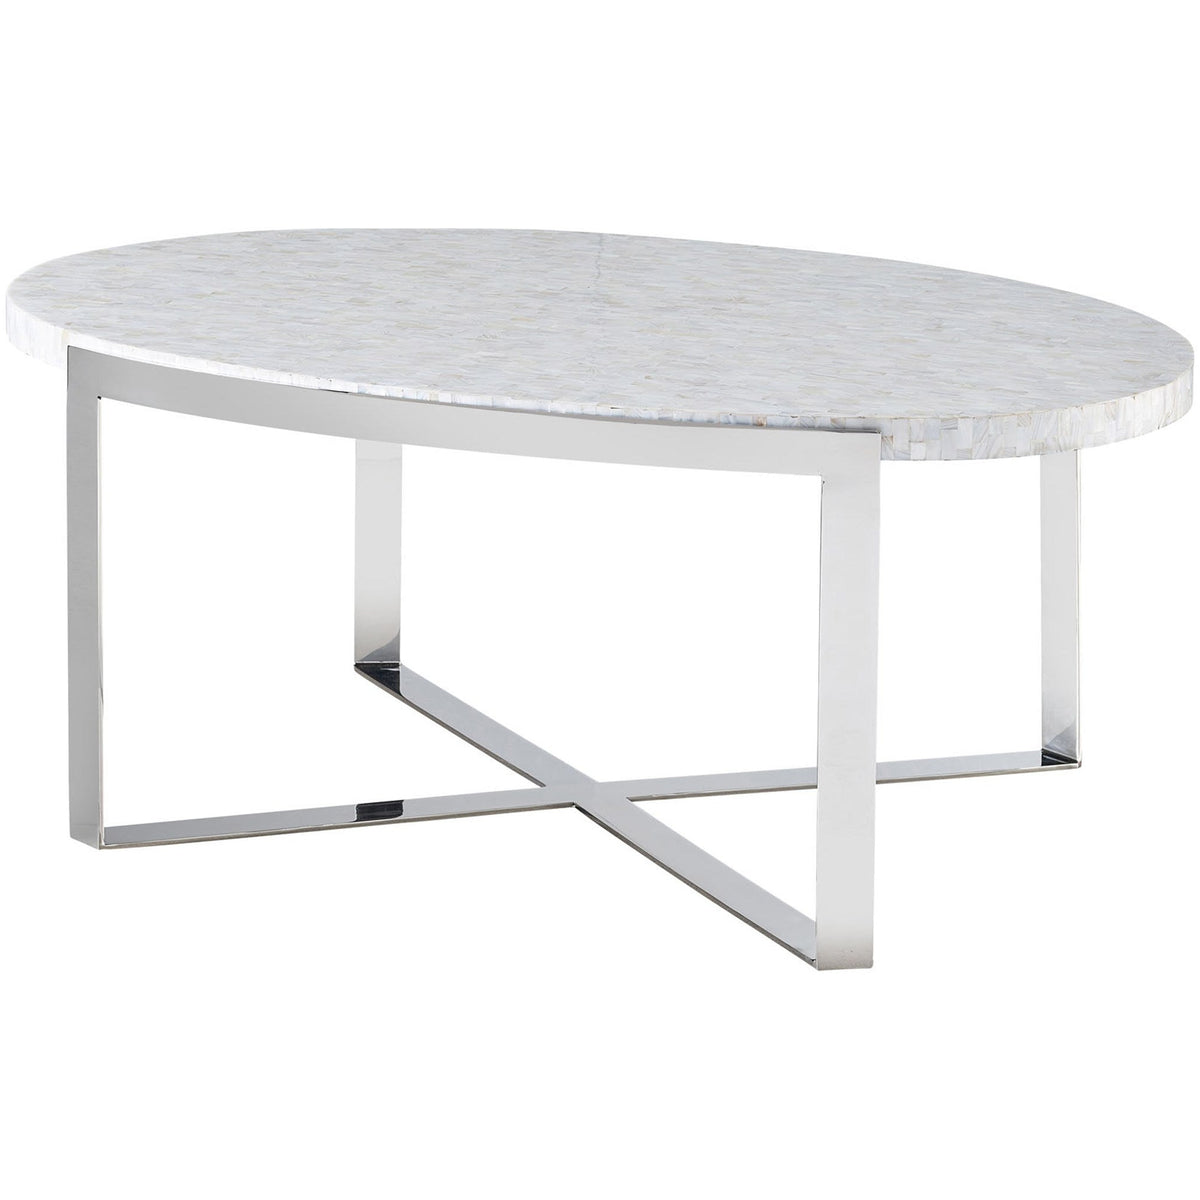 Impressionist Cocktail Table - Be Bold Furniture